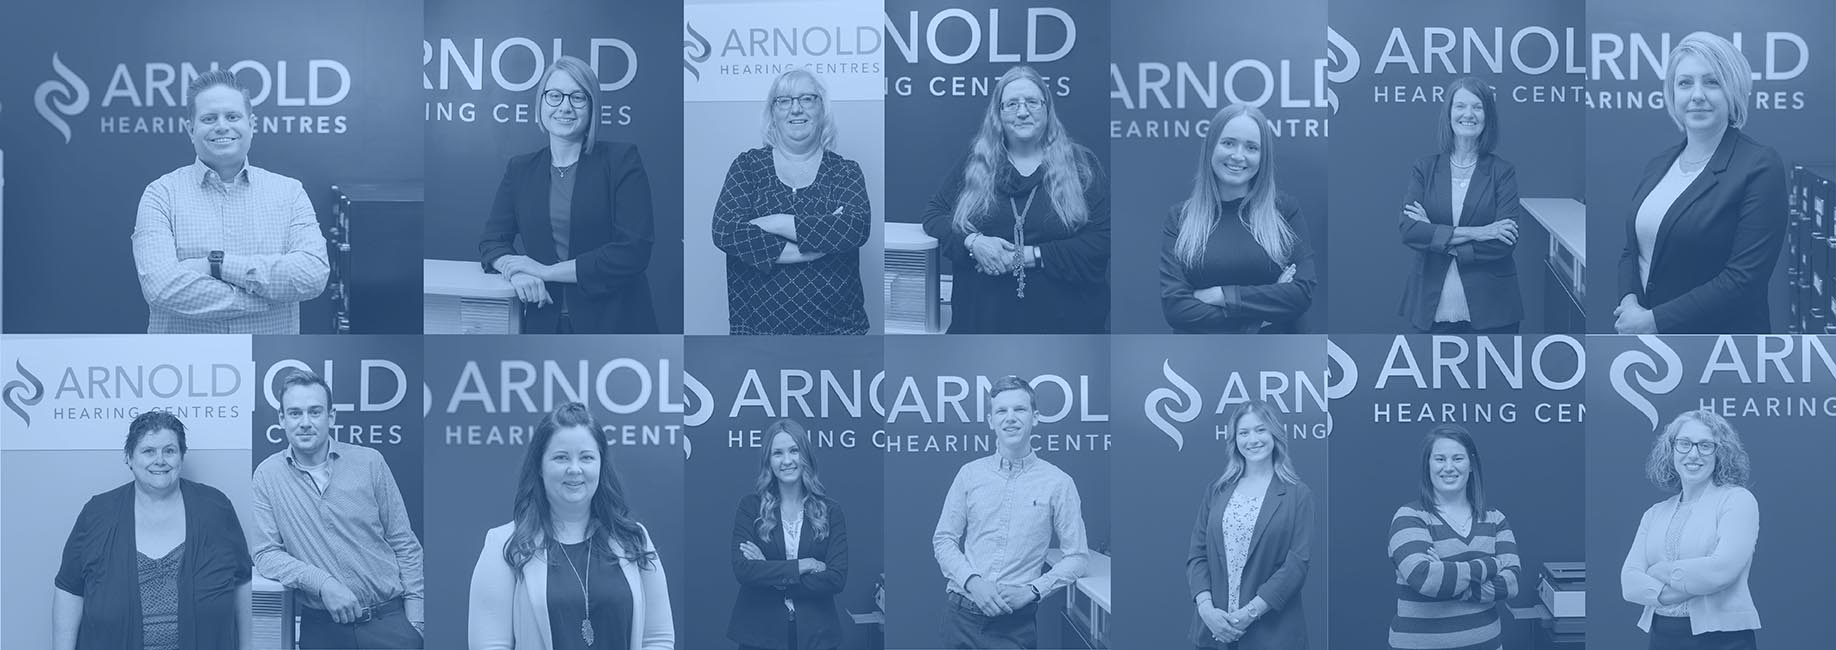 Arnold Hearing Centres' hearing experts and care team collage